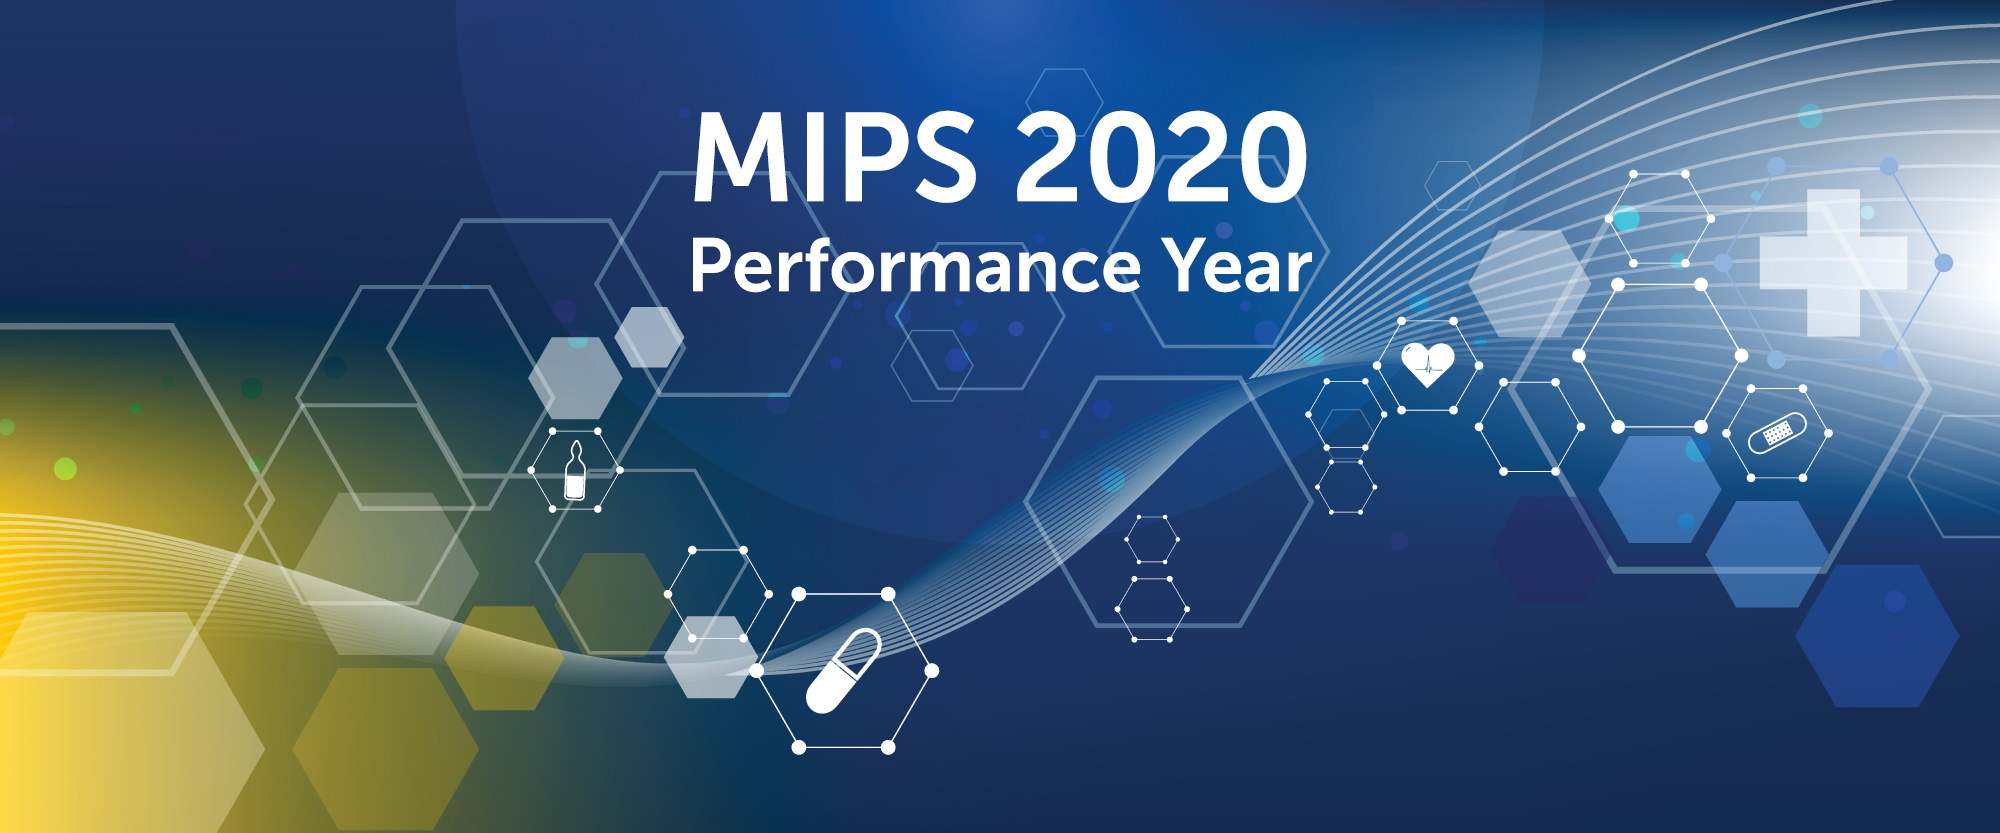 MIPS 2020